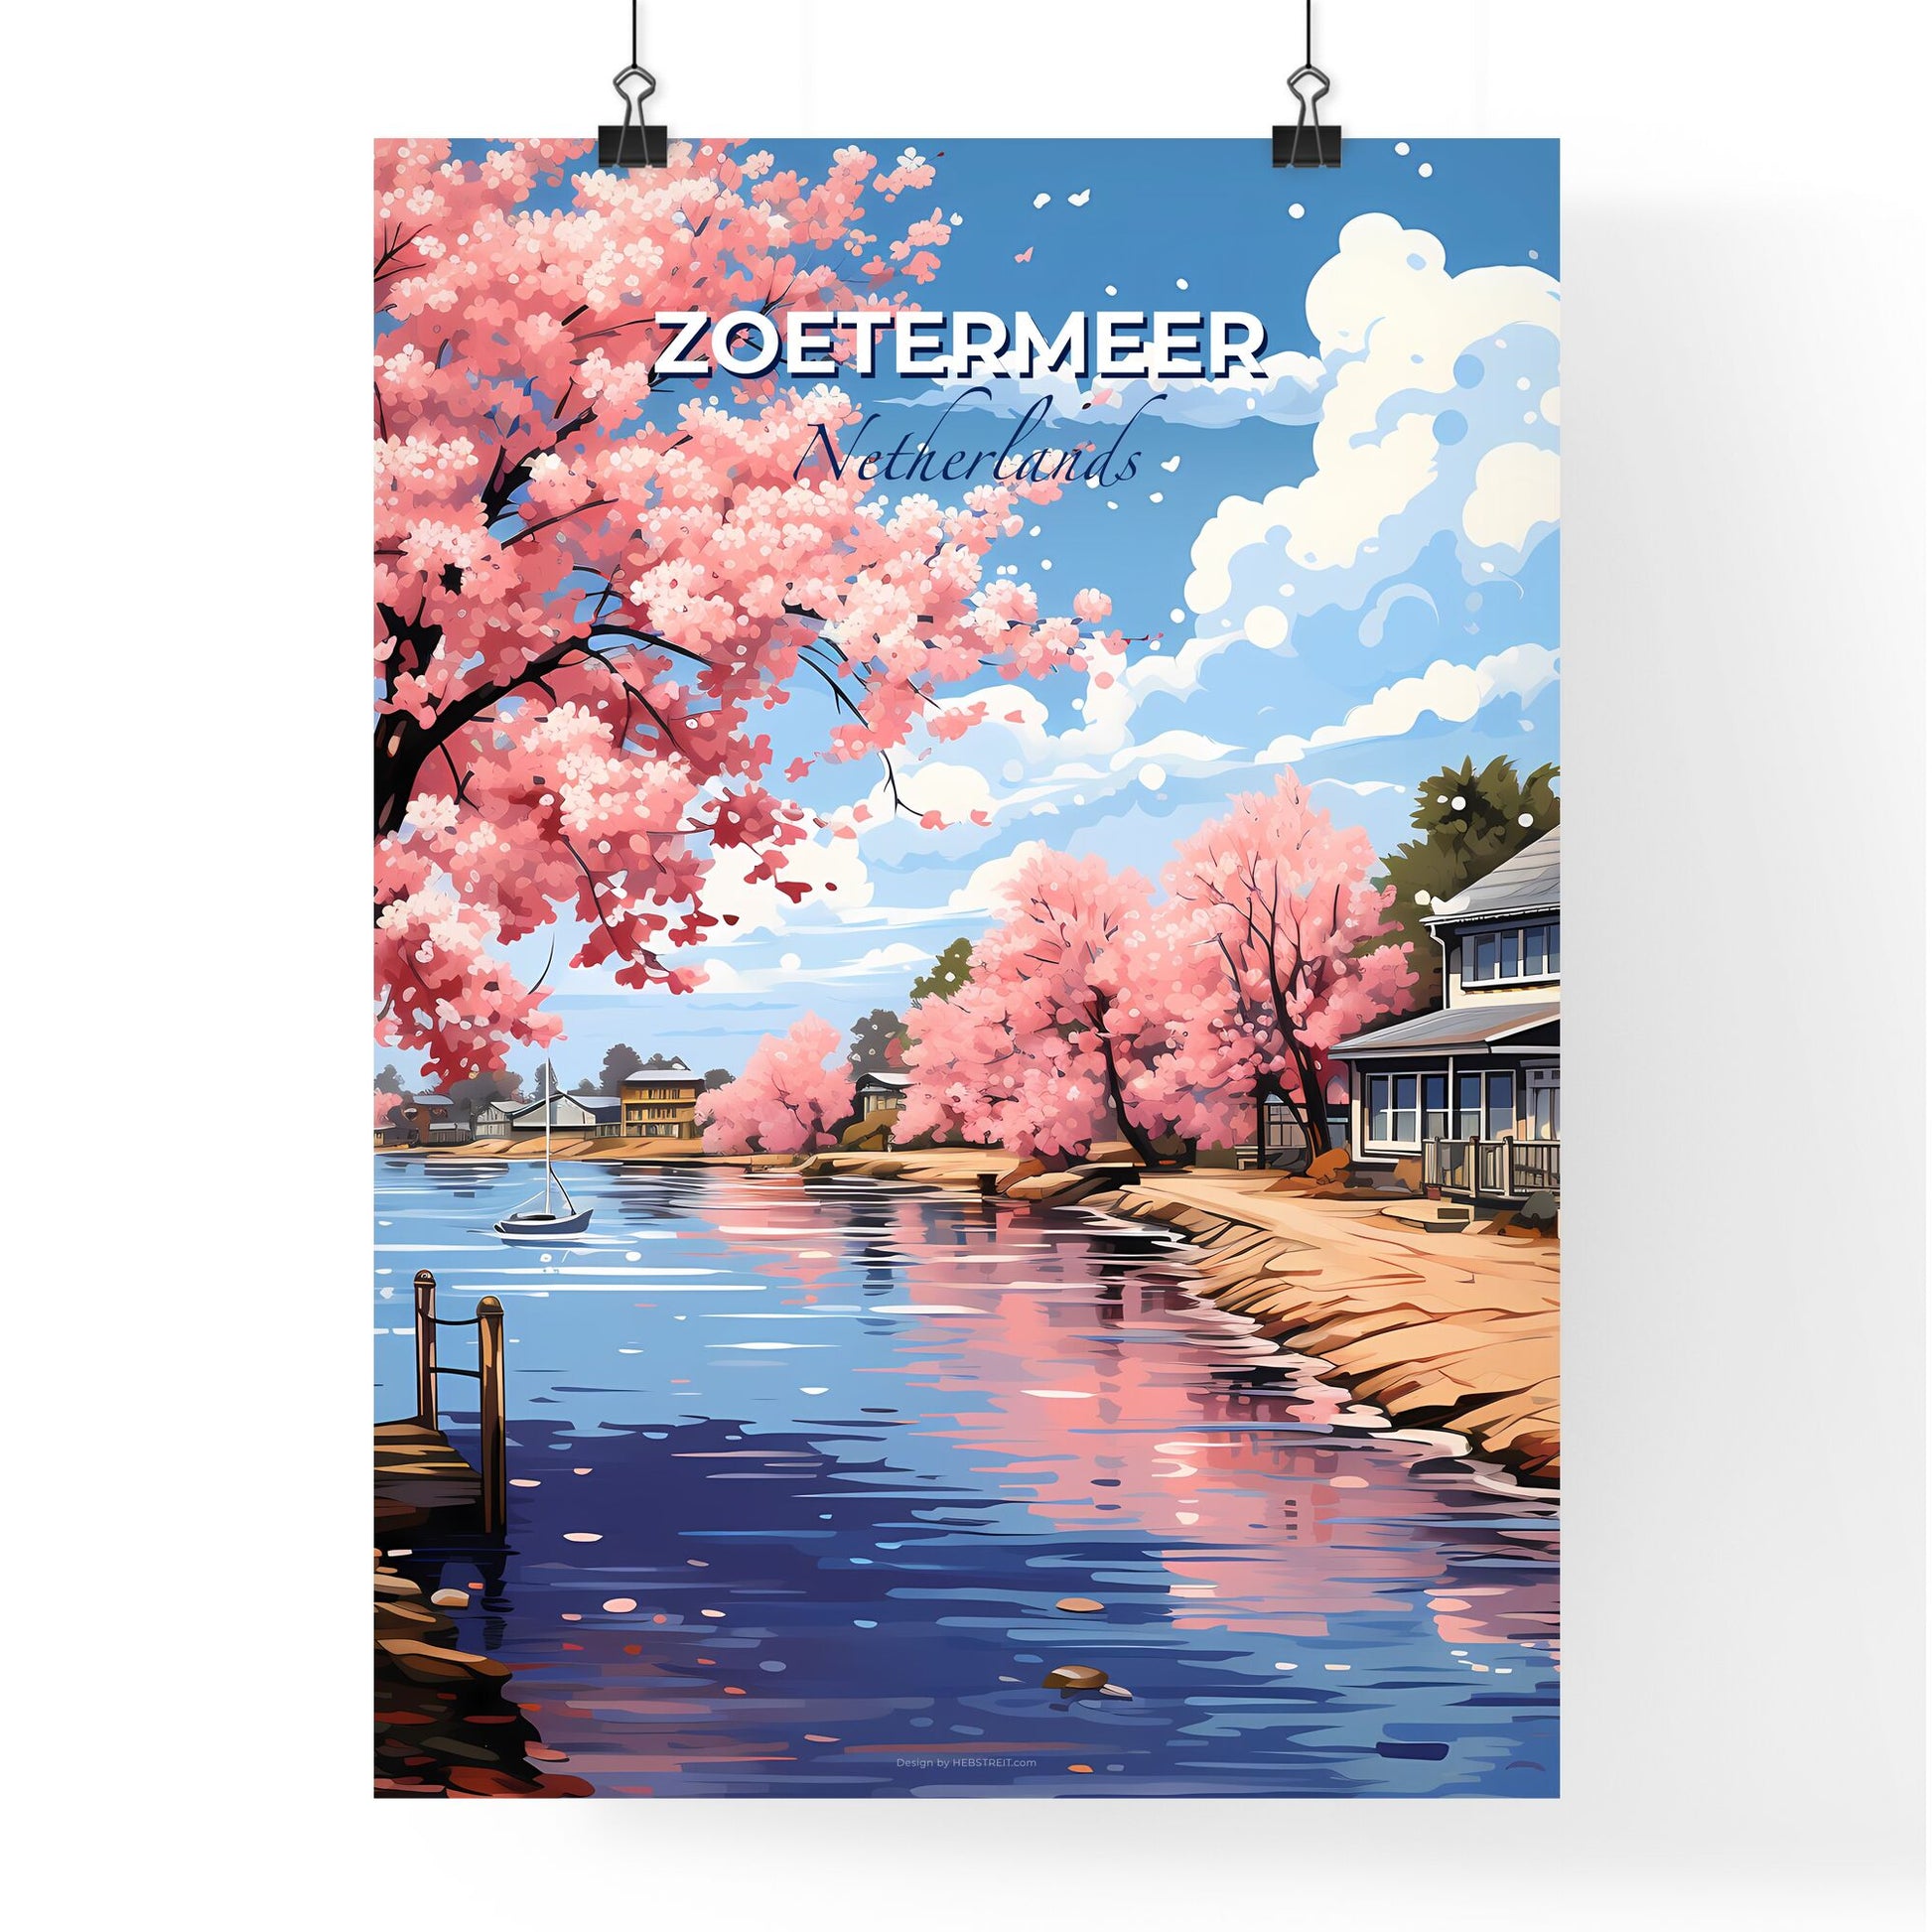 Zoetermeer, Netherlands, A Poster of a water body with pink flowers and houses on the side Default Title